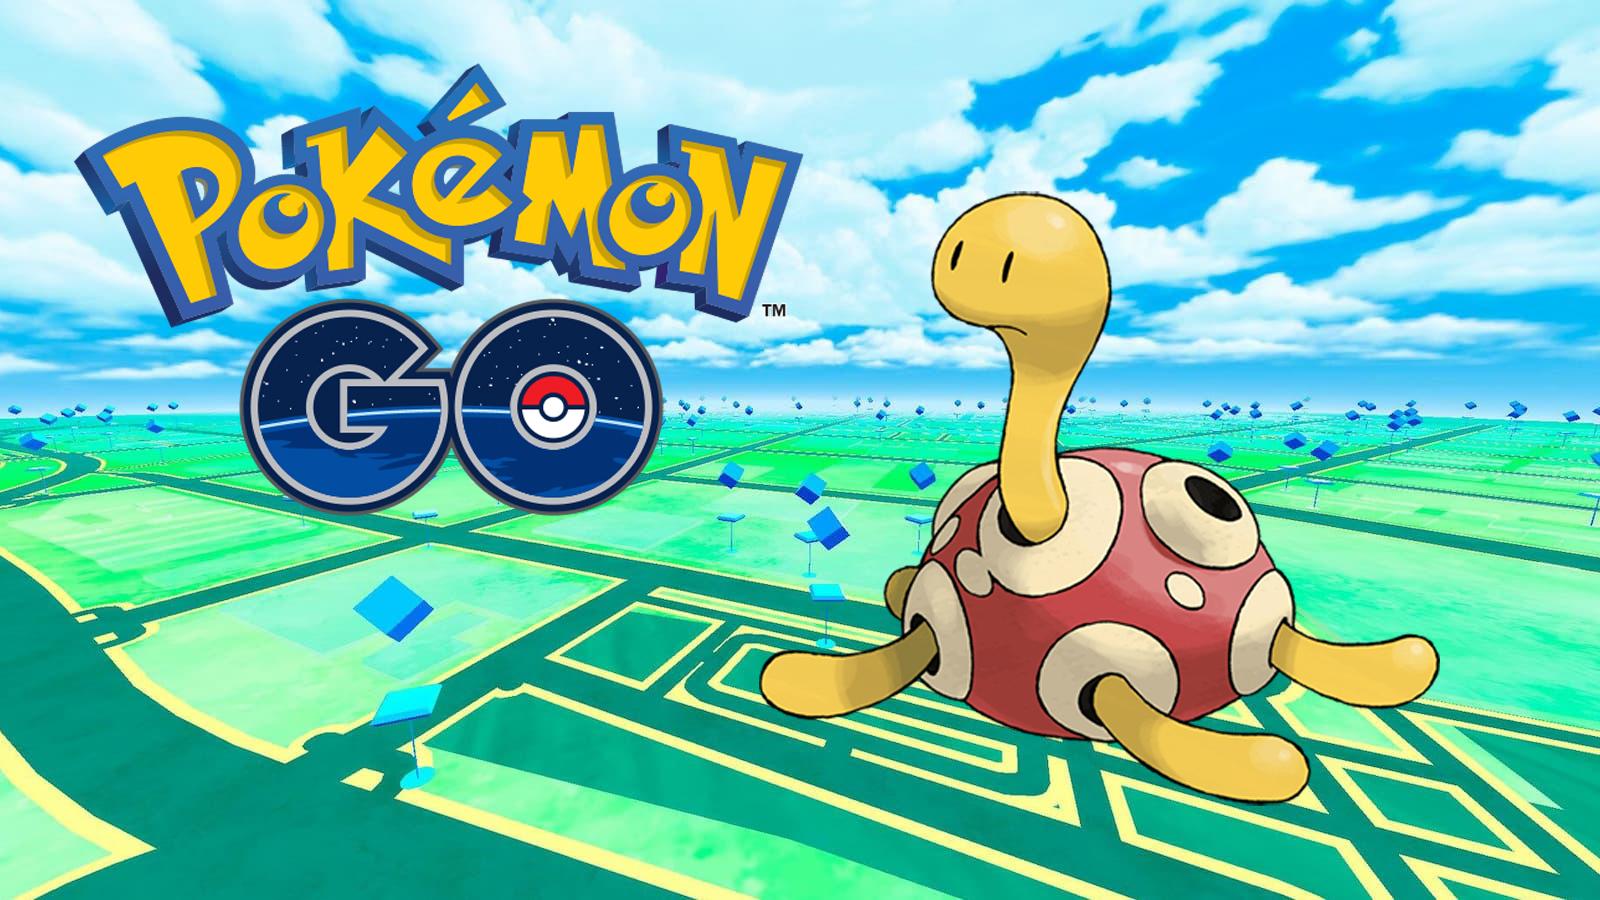 Shuckle and the Pokemon Go logo